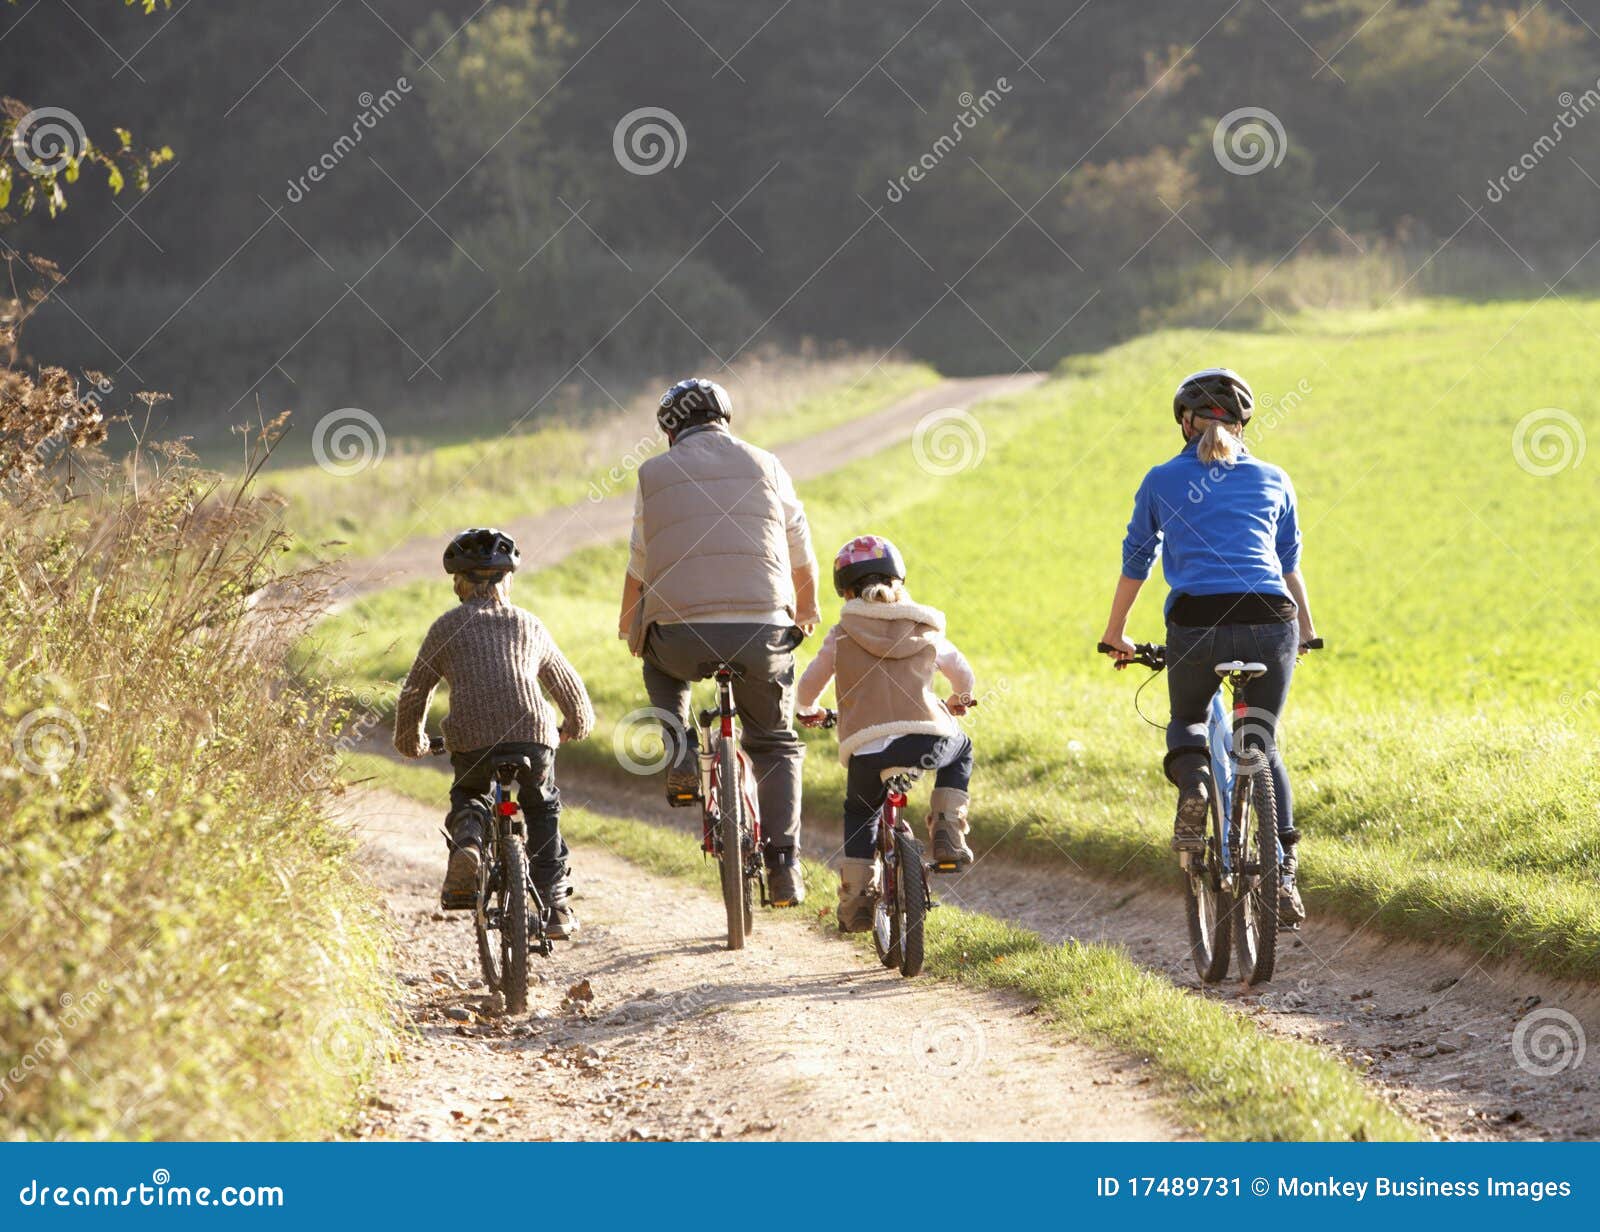 young parents with children ride bikes in park